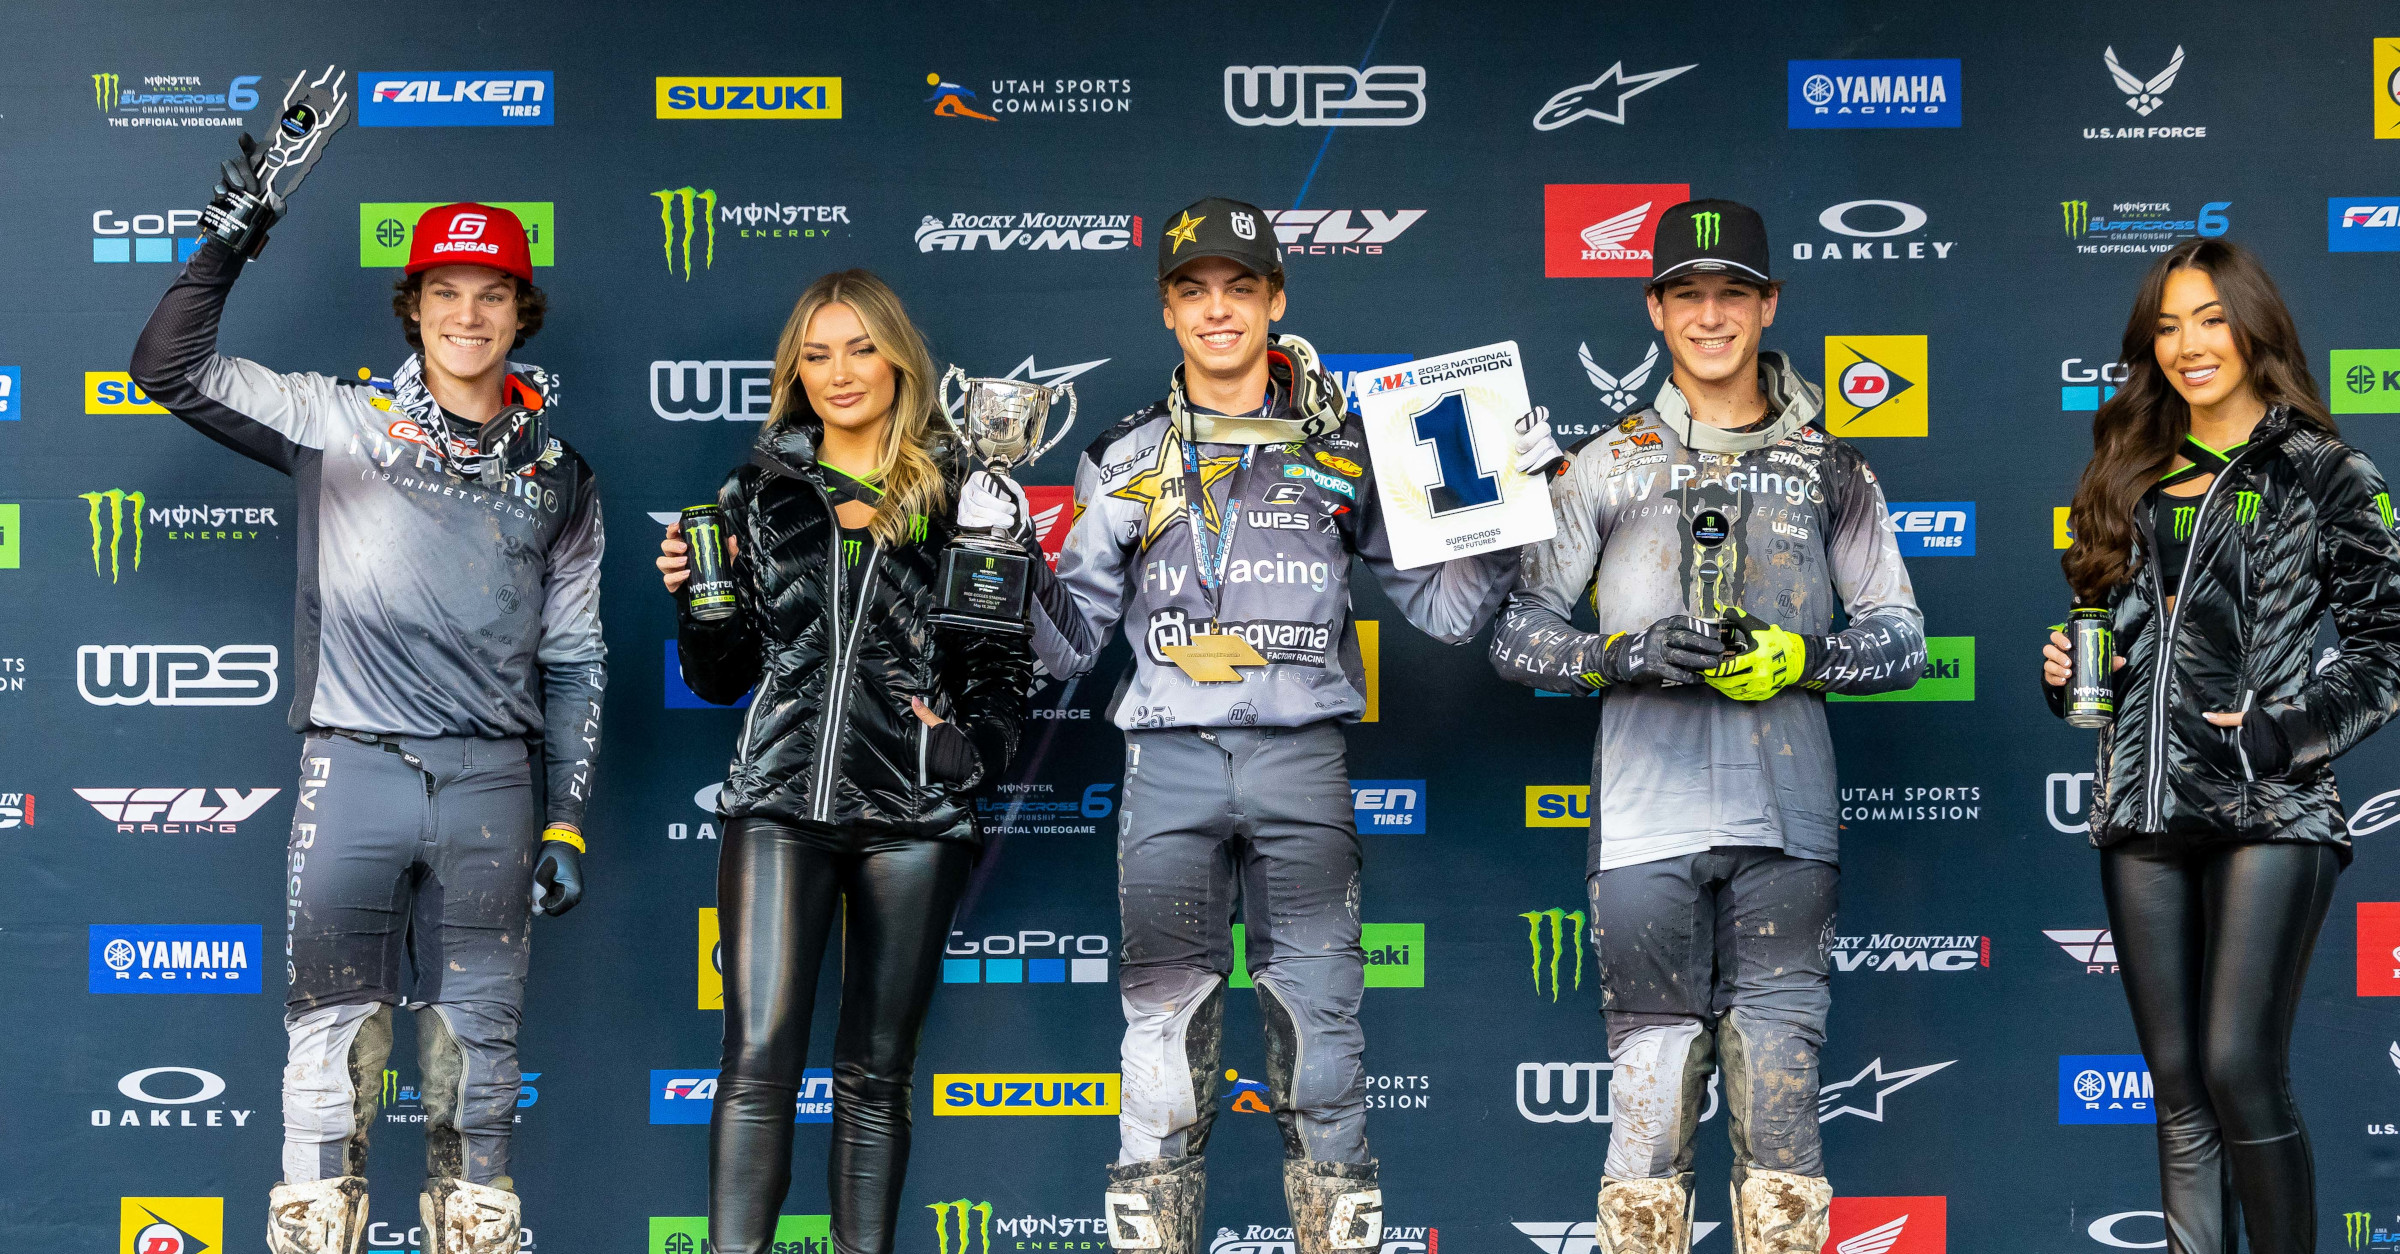 250SX Futures Class podium (riders left to right) Mark Fineis, Casey Cochran, and Parker Ross. Photo Credit: Feld Motor Sports, Inc.